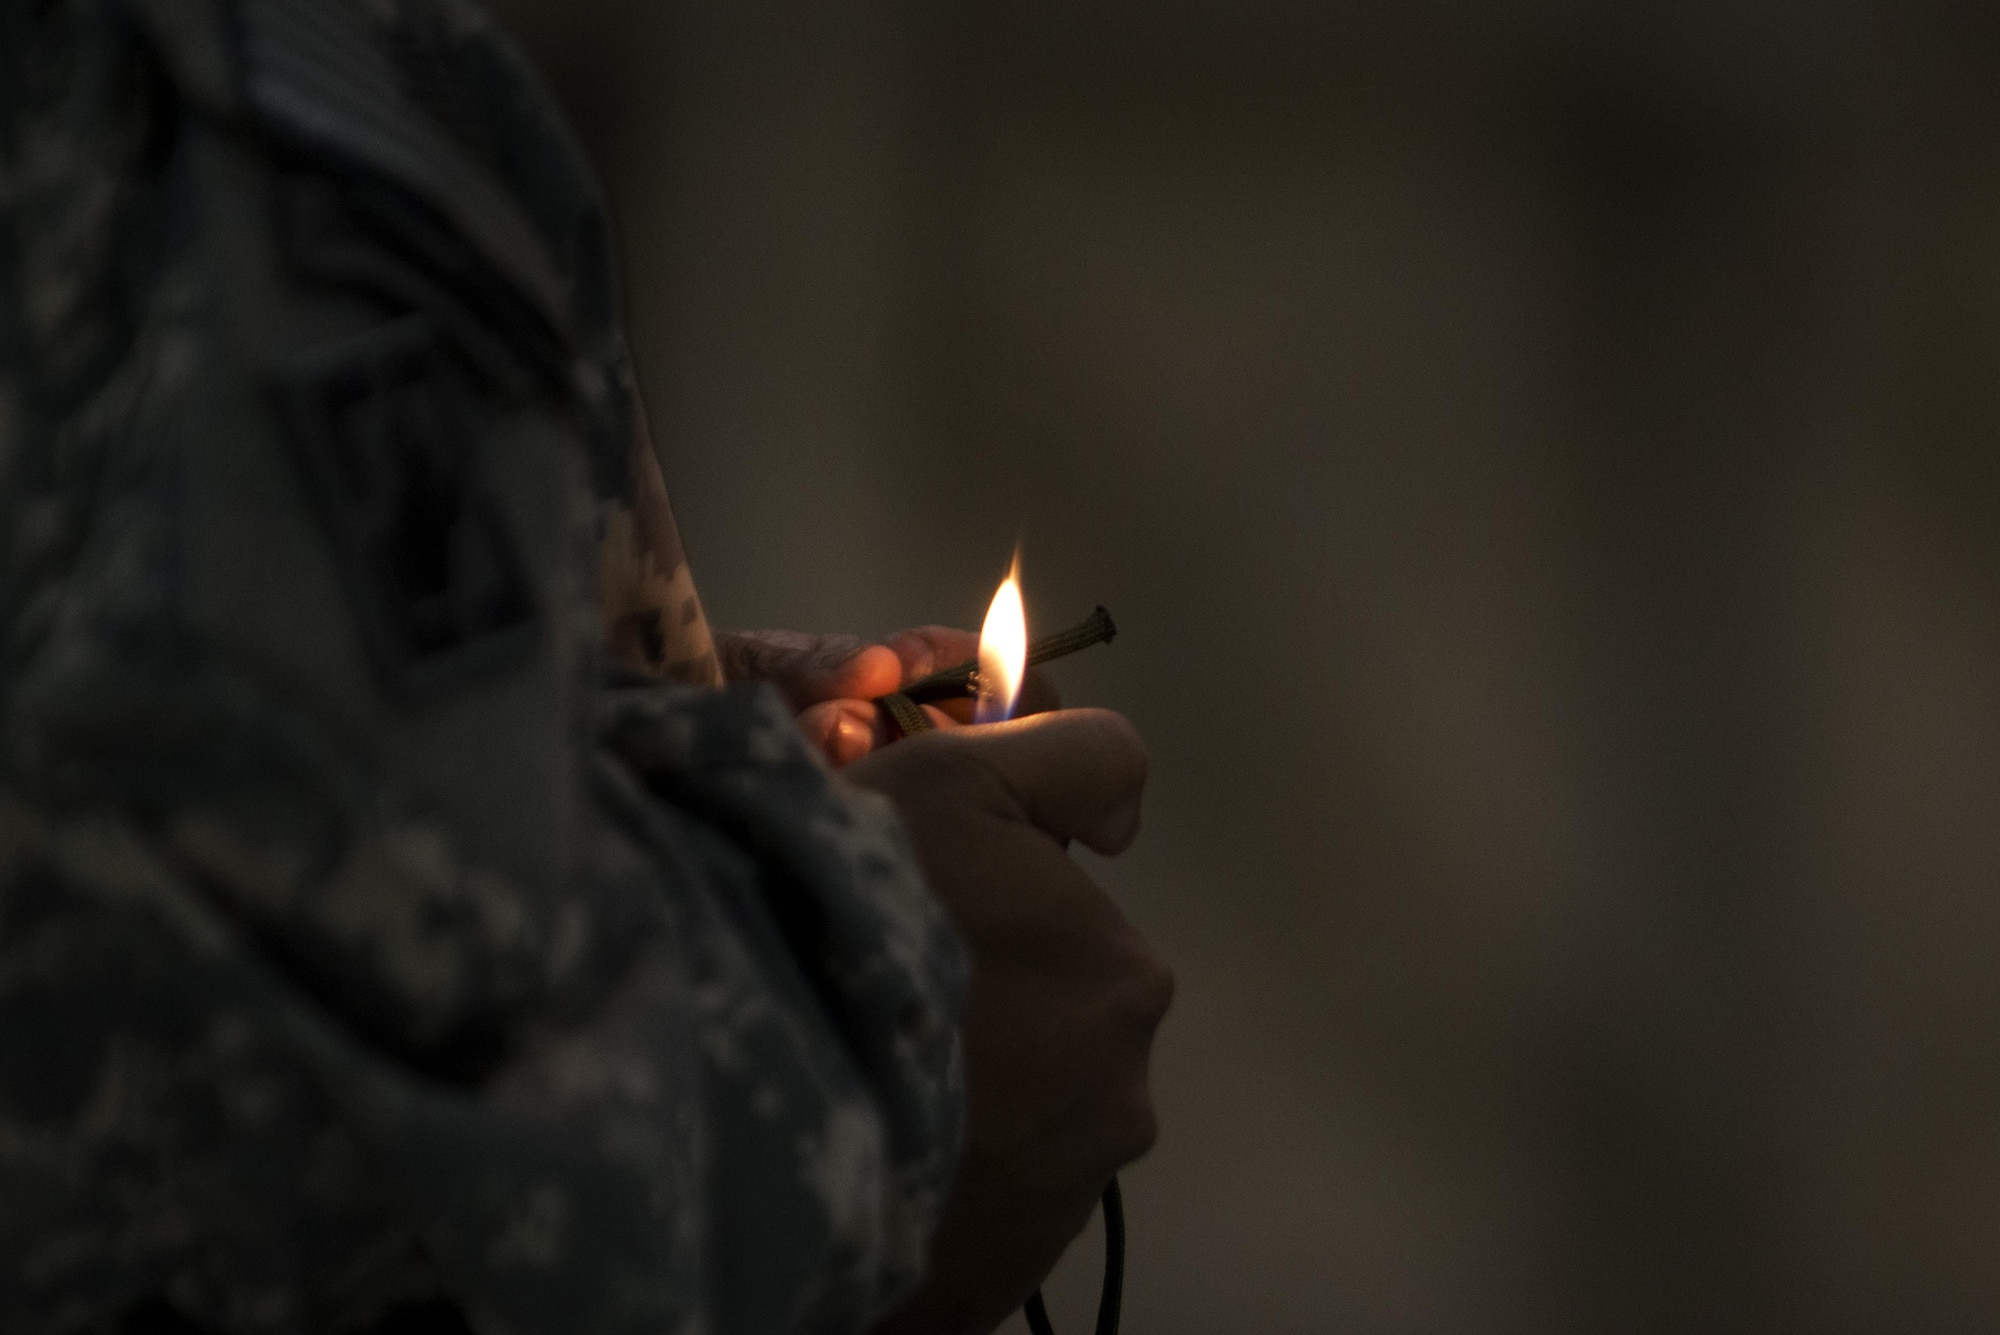 A paratrooper with the 4th Infantry Brigade Combat Team (Airborne), 25th Infantry Division, U.S. Army Alaska, burns the ends of his laces before boarding a Royal New Zealand Air Force C-130 Hercules for a jump during Red-Flag Alaska 17-1 at Joint Base Elmendorf-Richardson, Alaska, Oct. 12, 2016. Red-Flag Alaska 17-1 provides joint offensive counter-air, interdiction, close air support, and large force employment training in a simulated combat environment. 